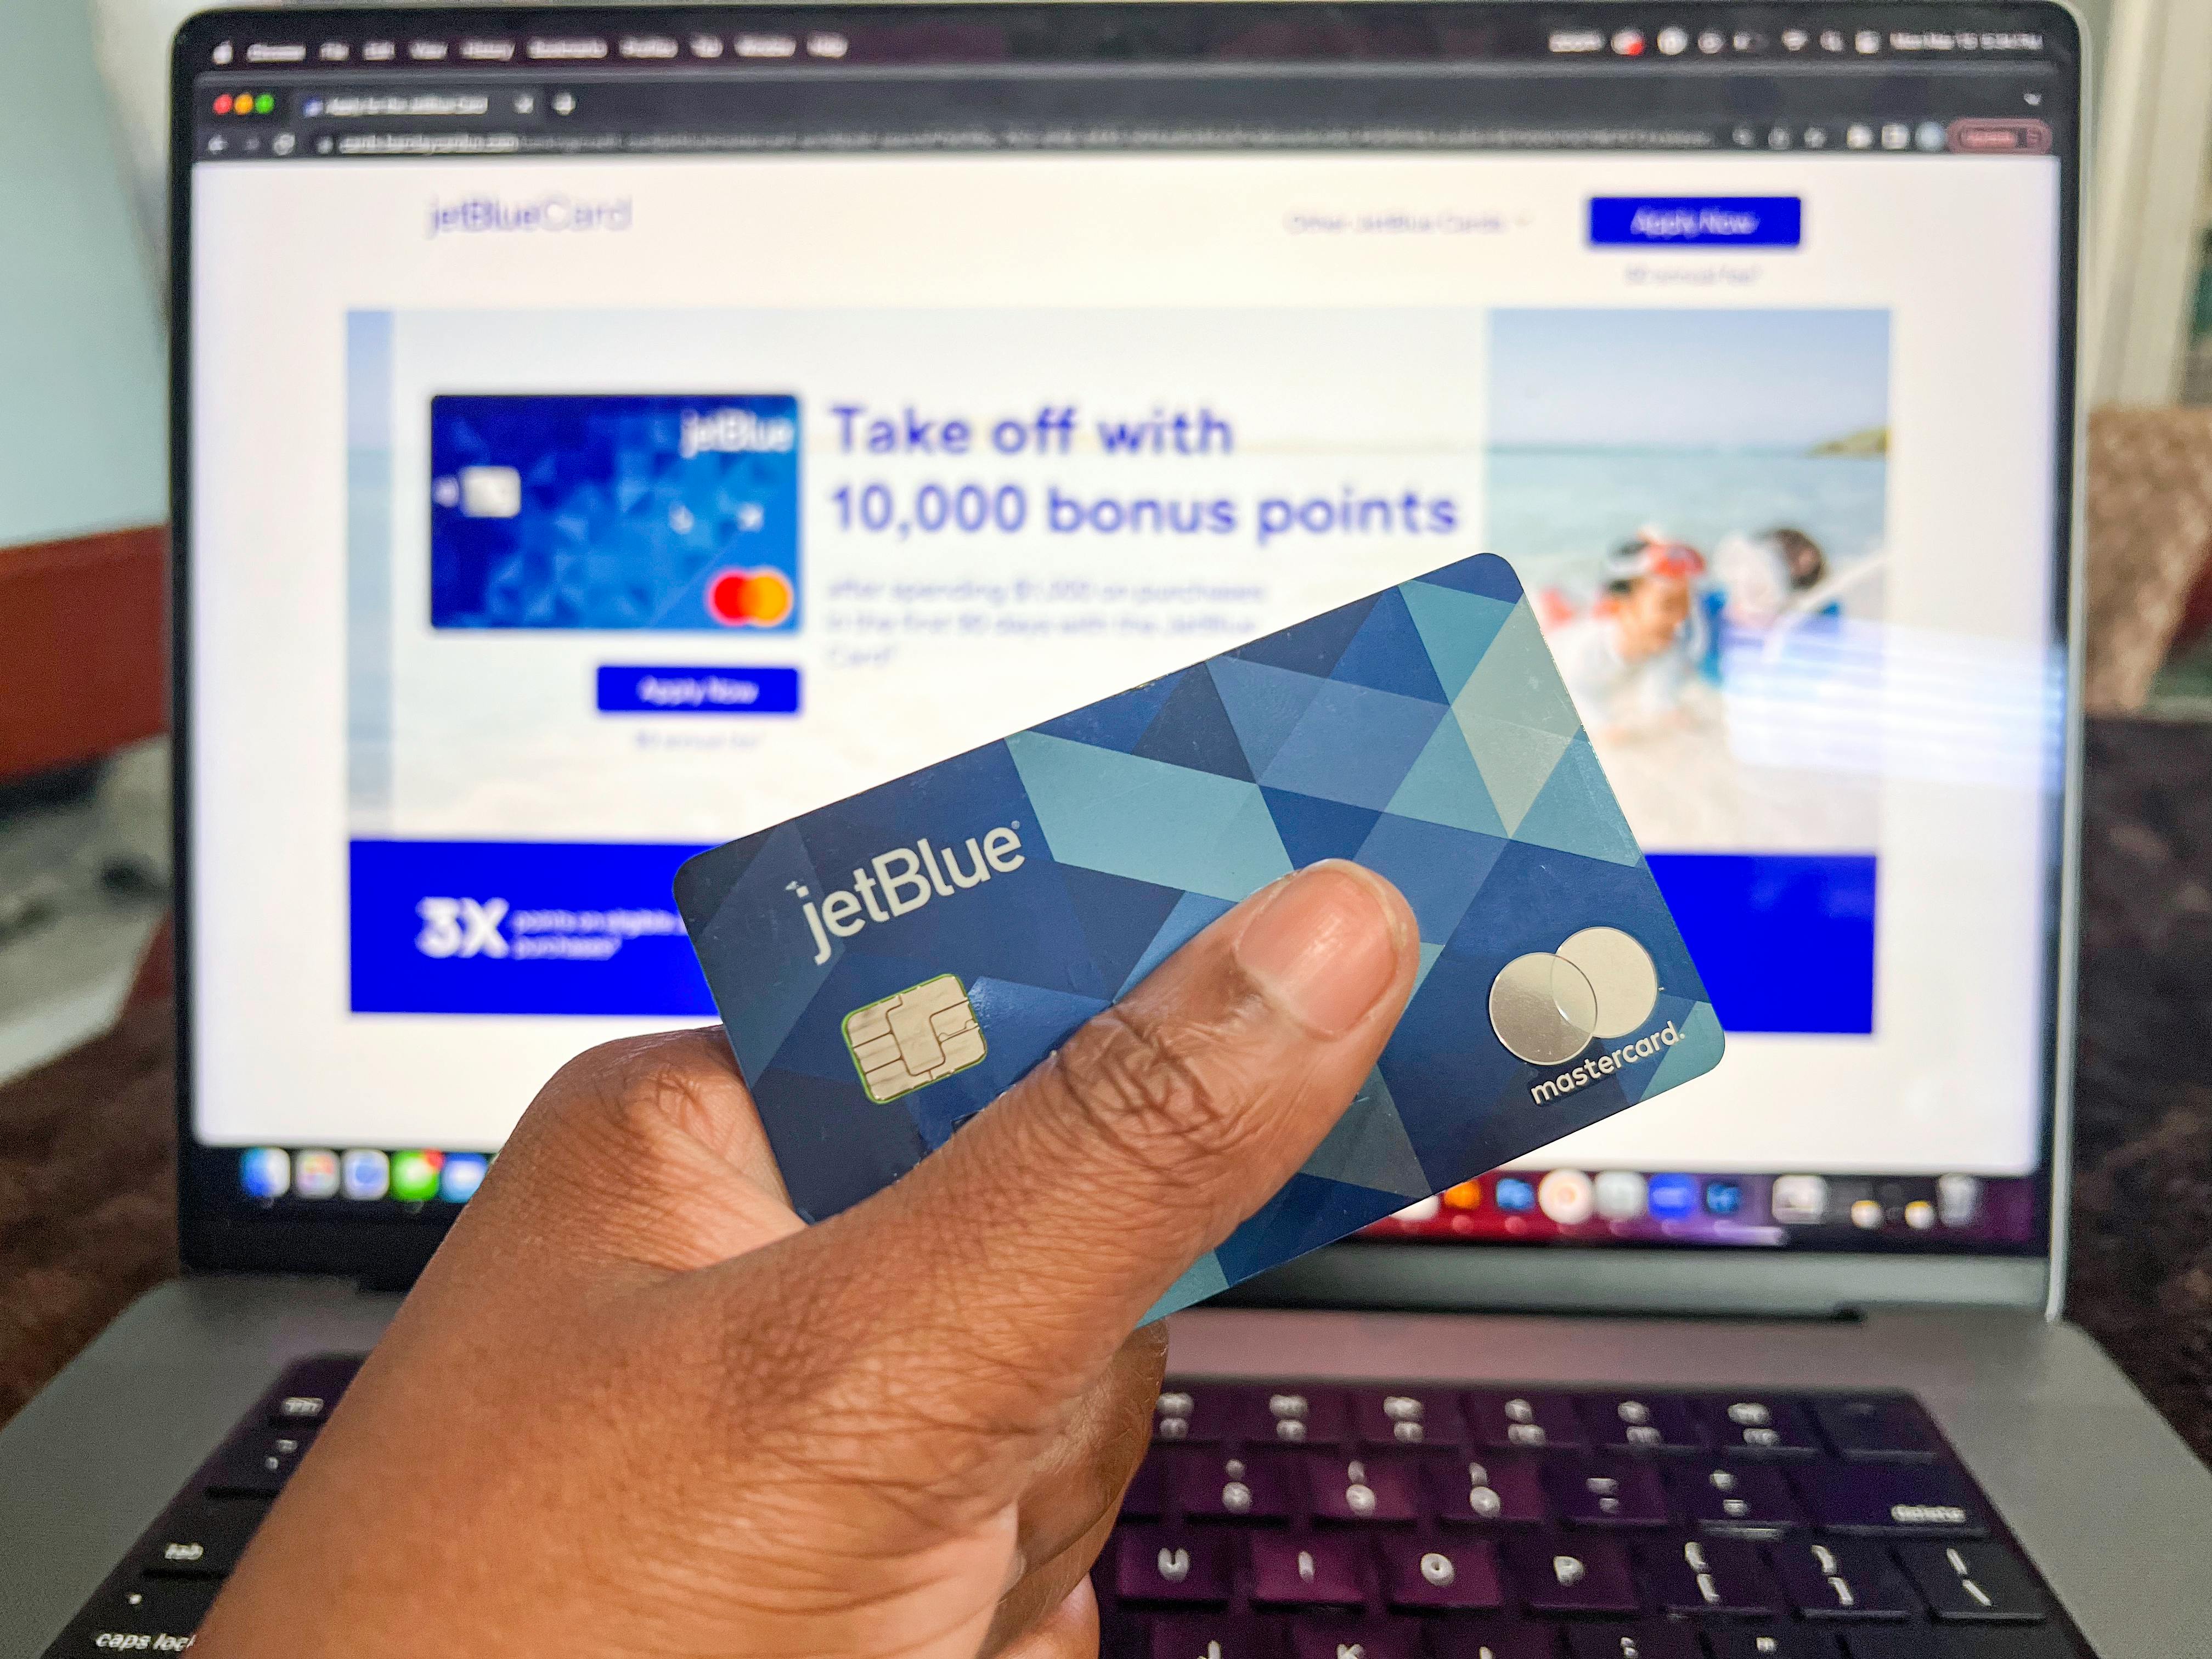 Everything You Need to Know About JetBlue Credit Cards